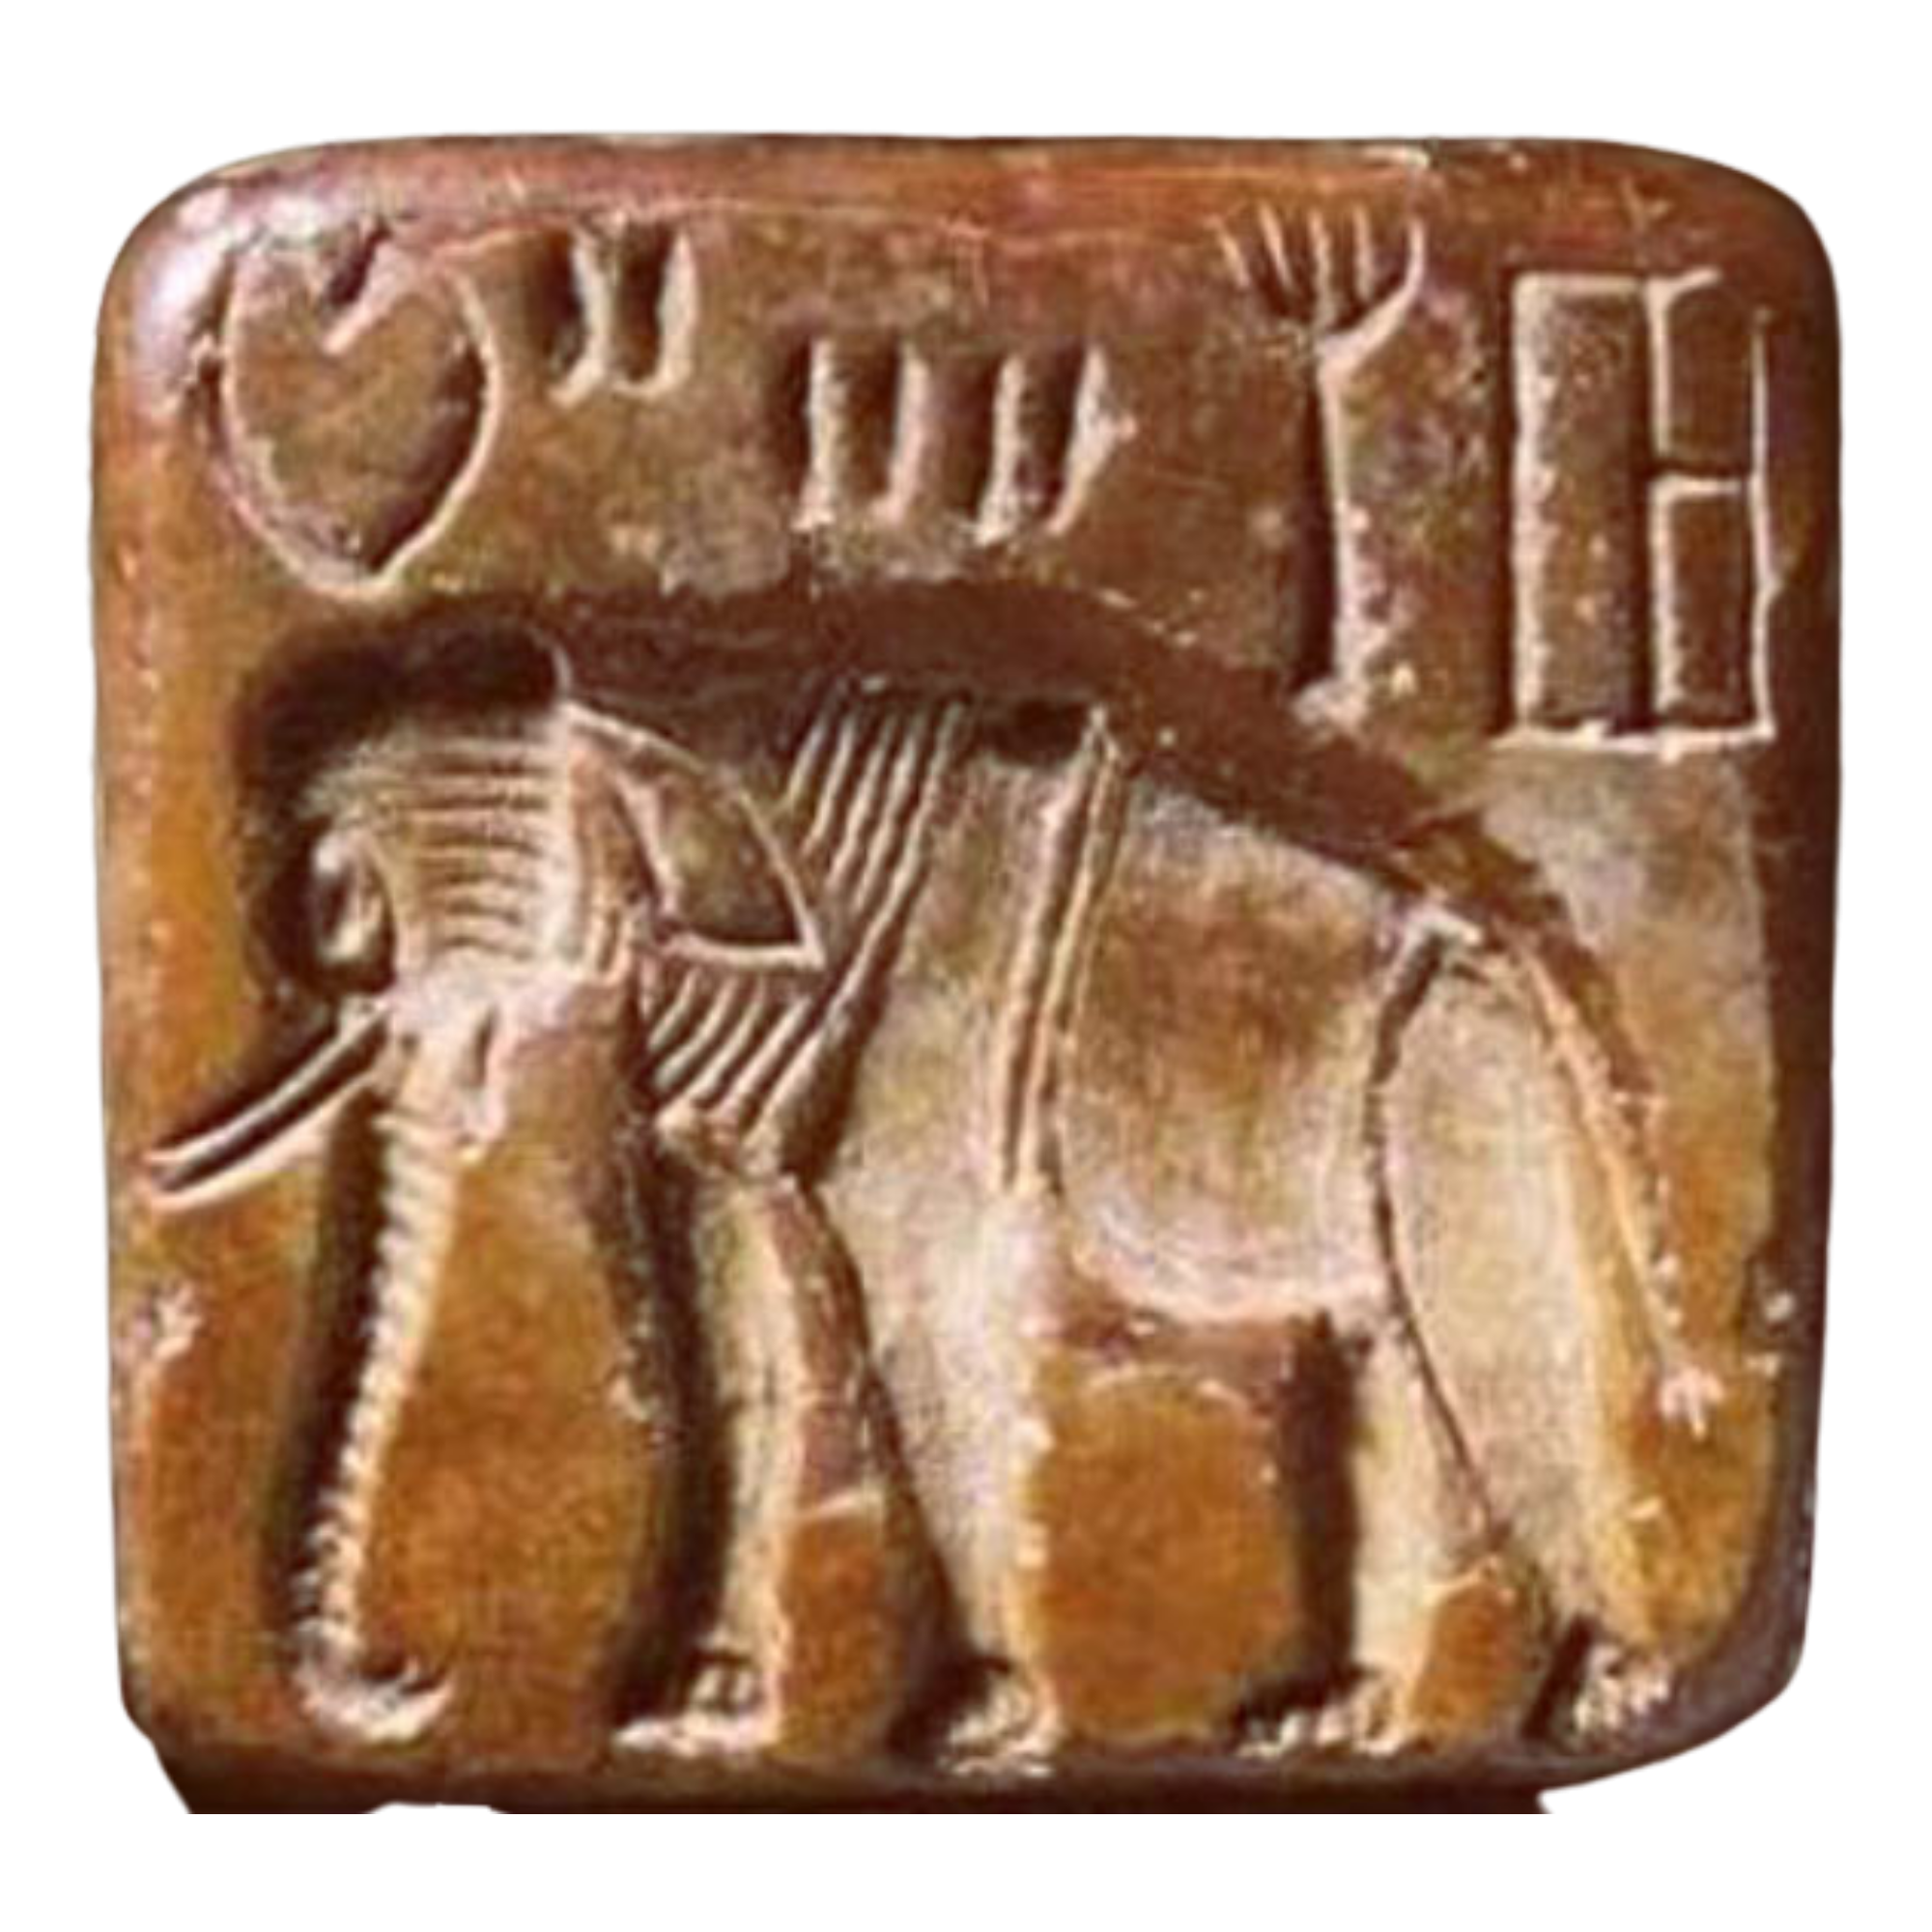 Photo of The Indus Valley riddle